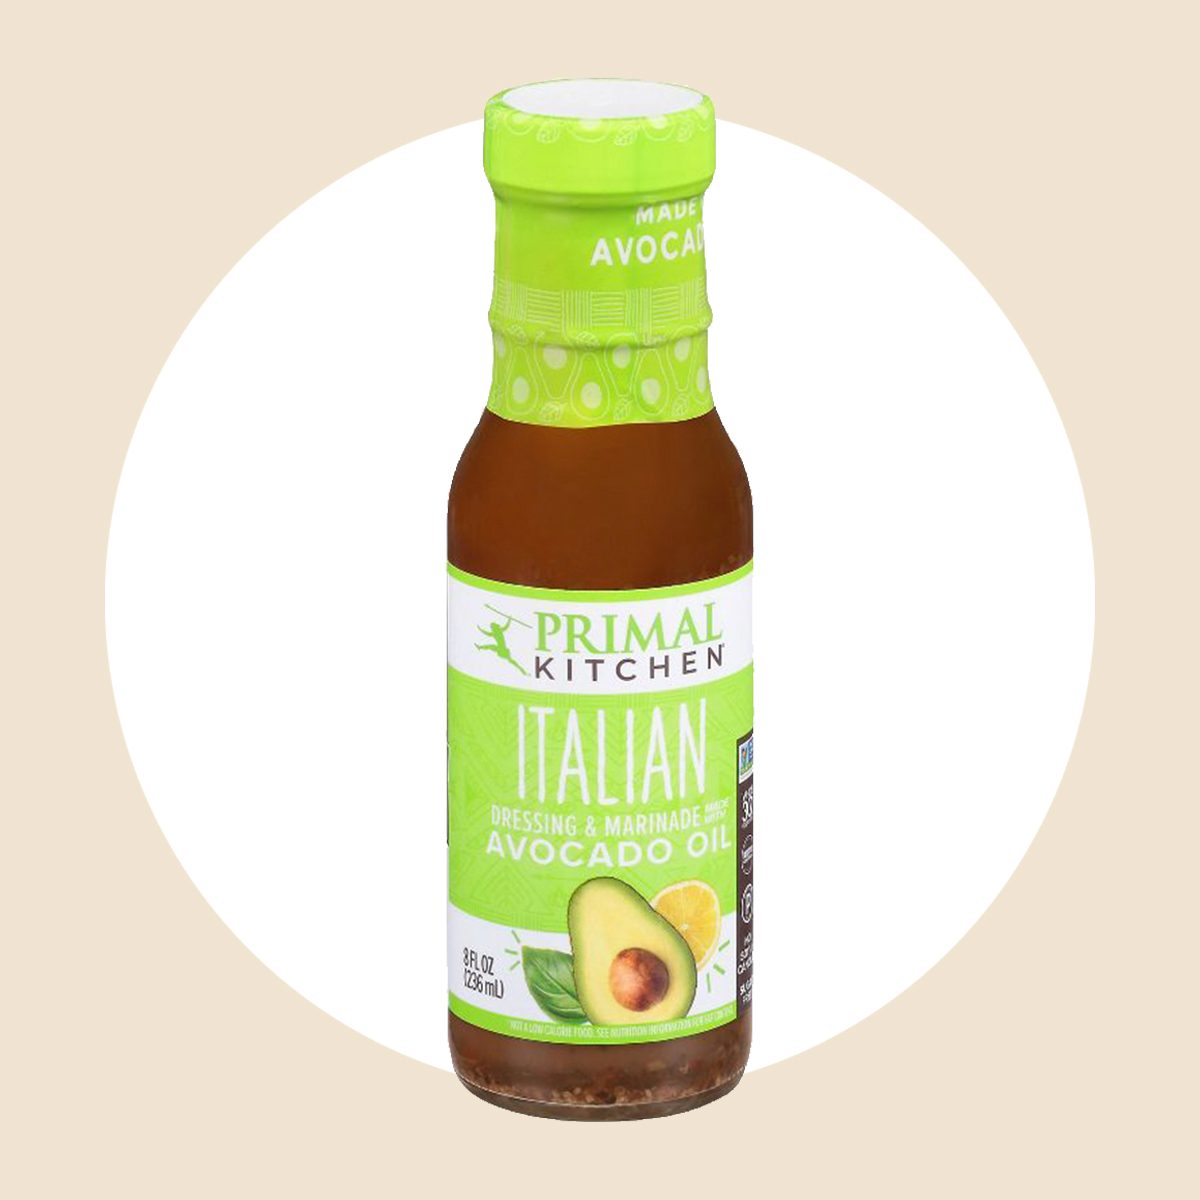 We Tried 10 Brands: These Are the Best Italian Dressing Options